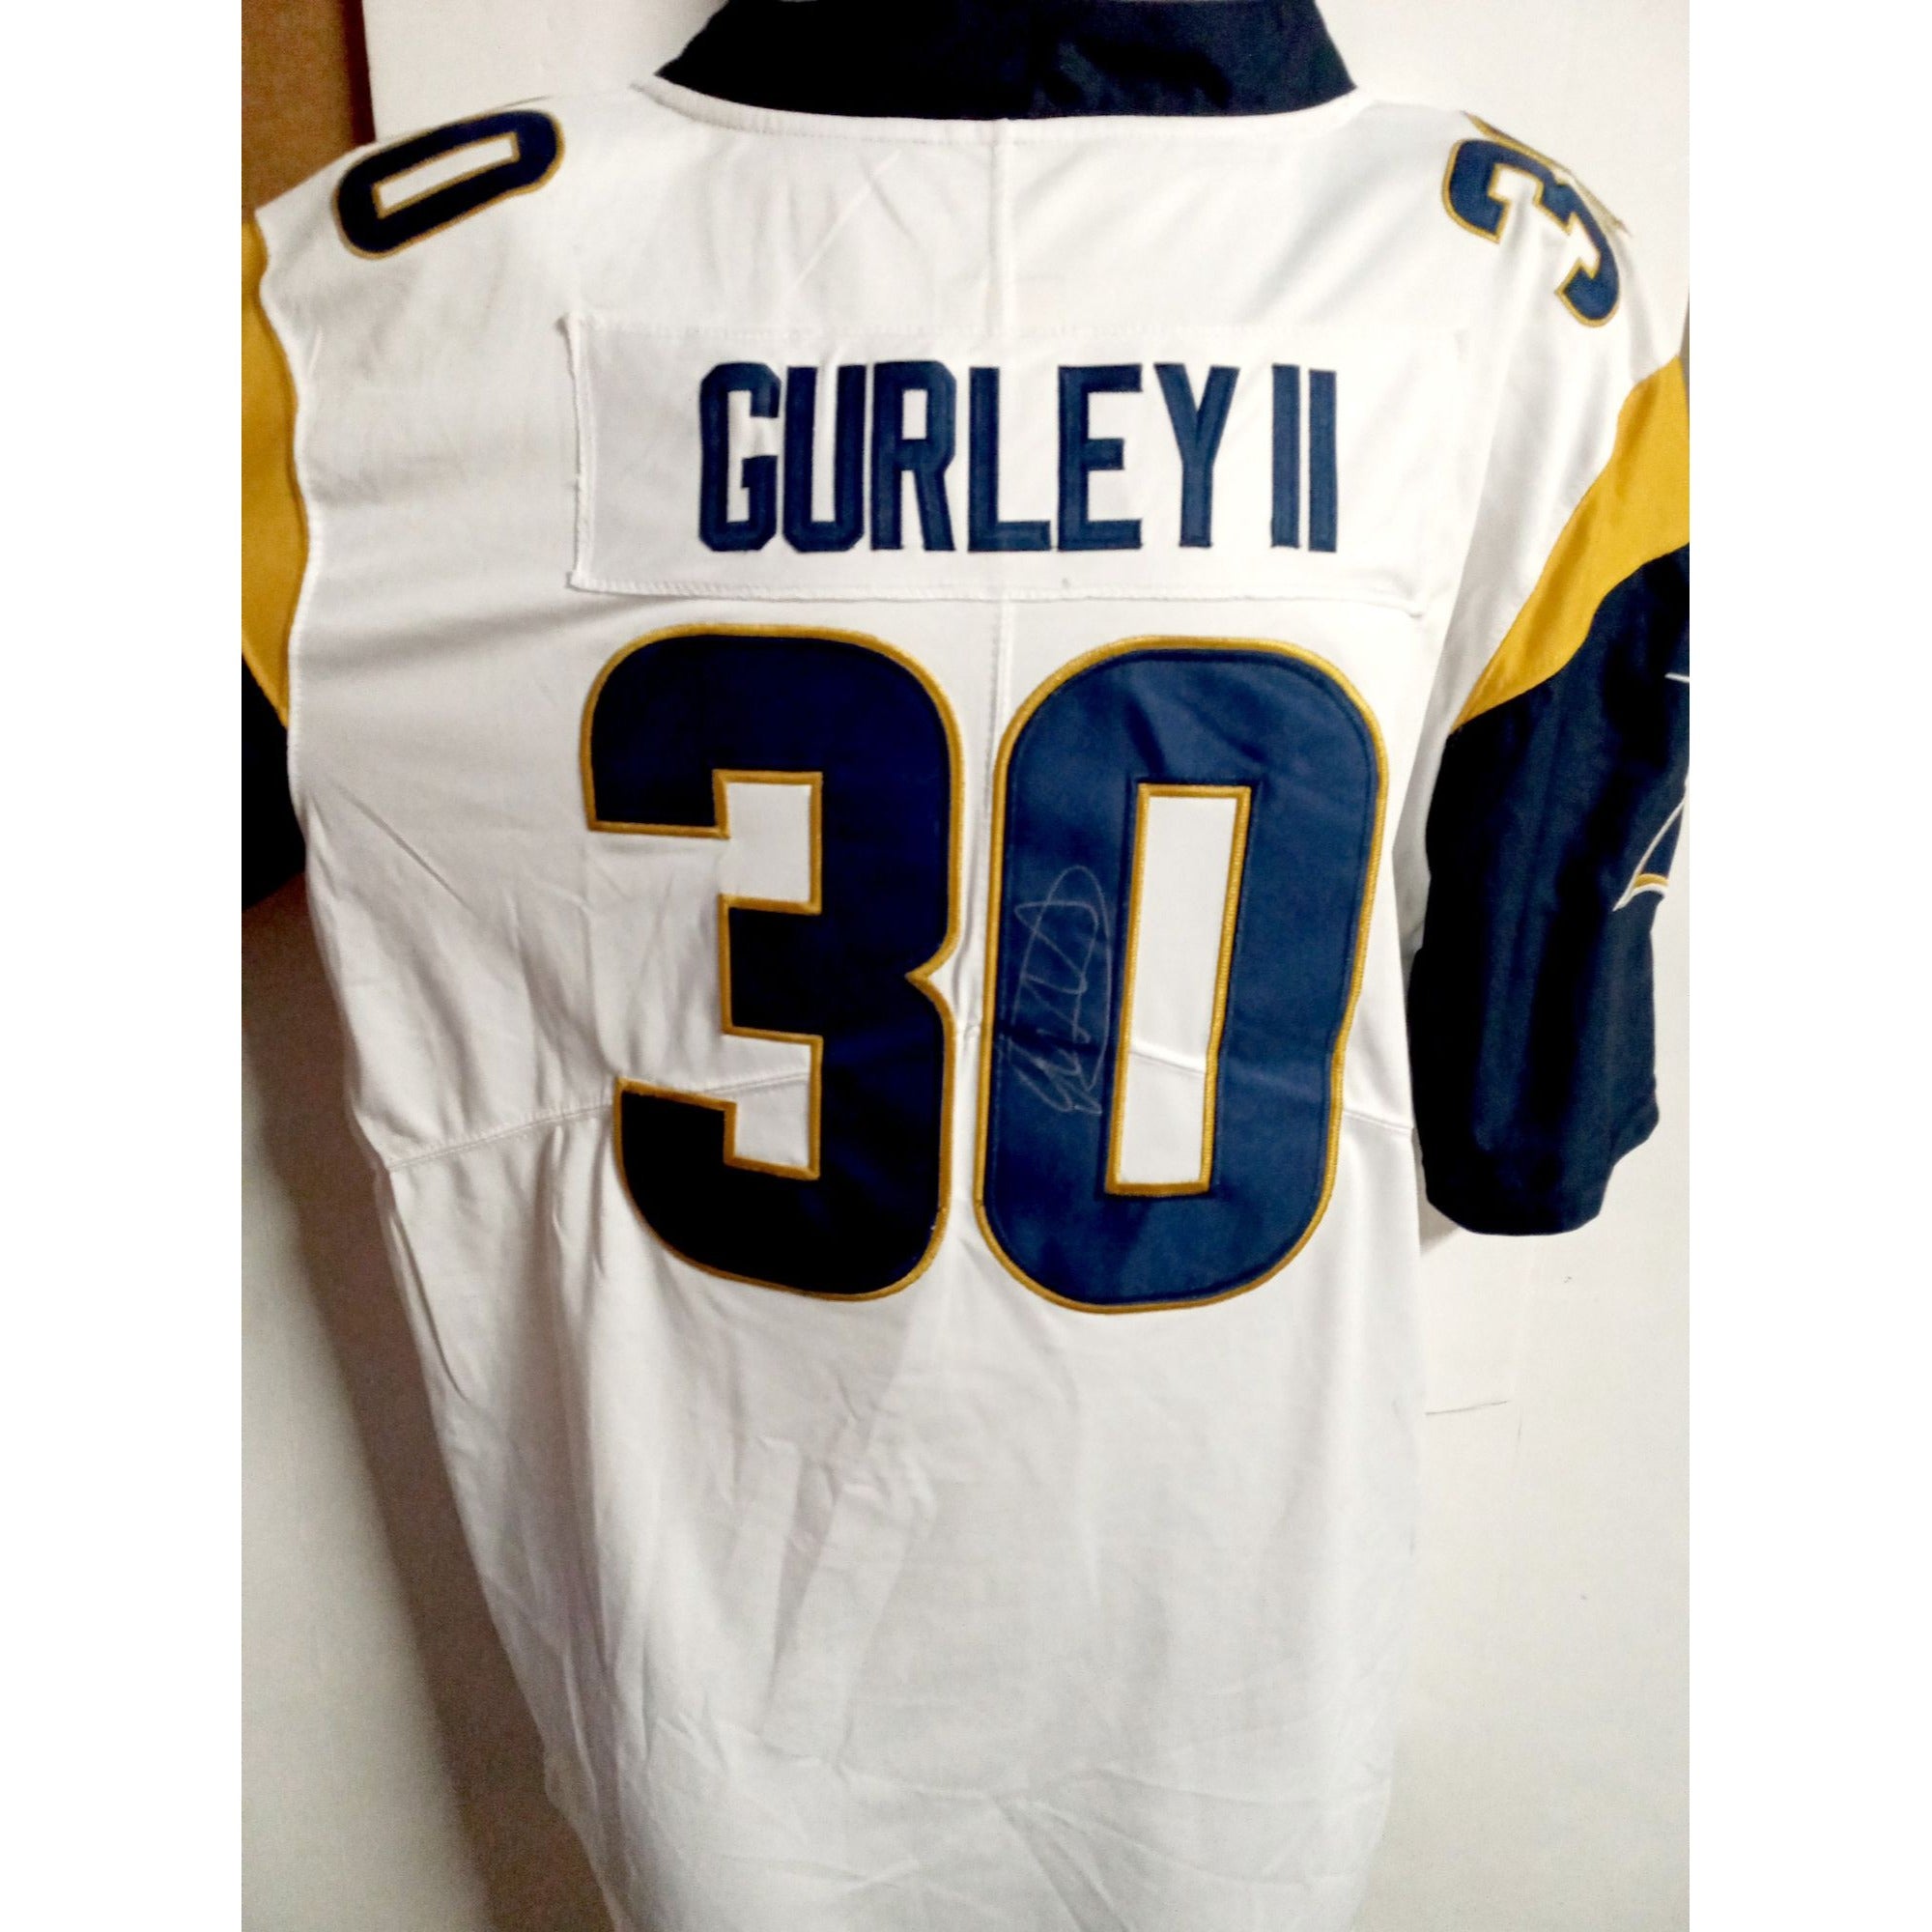 Todd Gurley Los Angeles Rams NFL MVP signed jersey